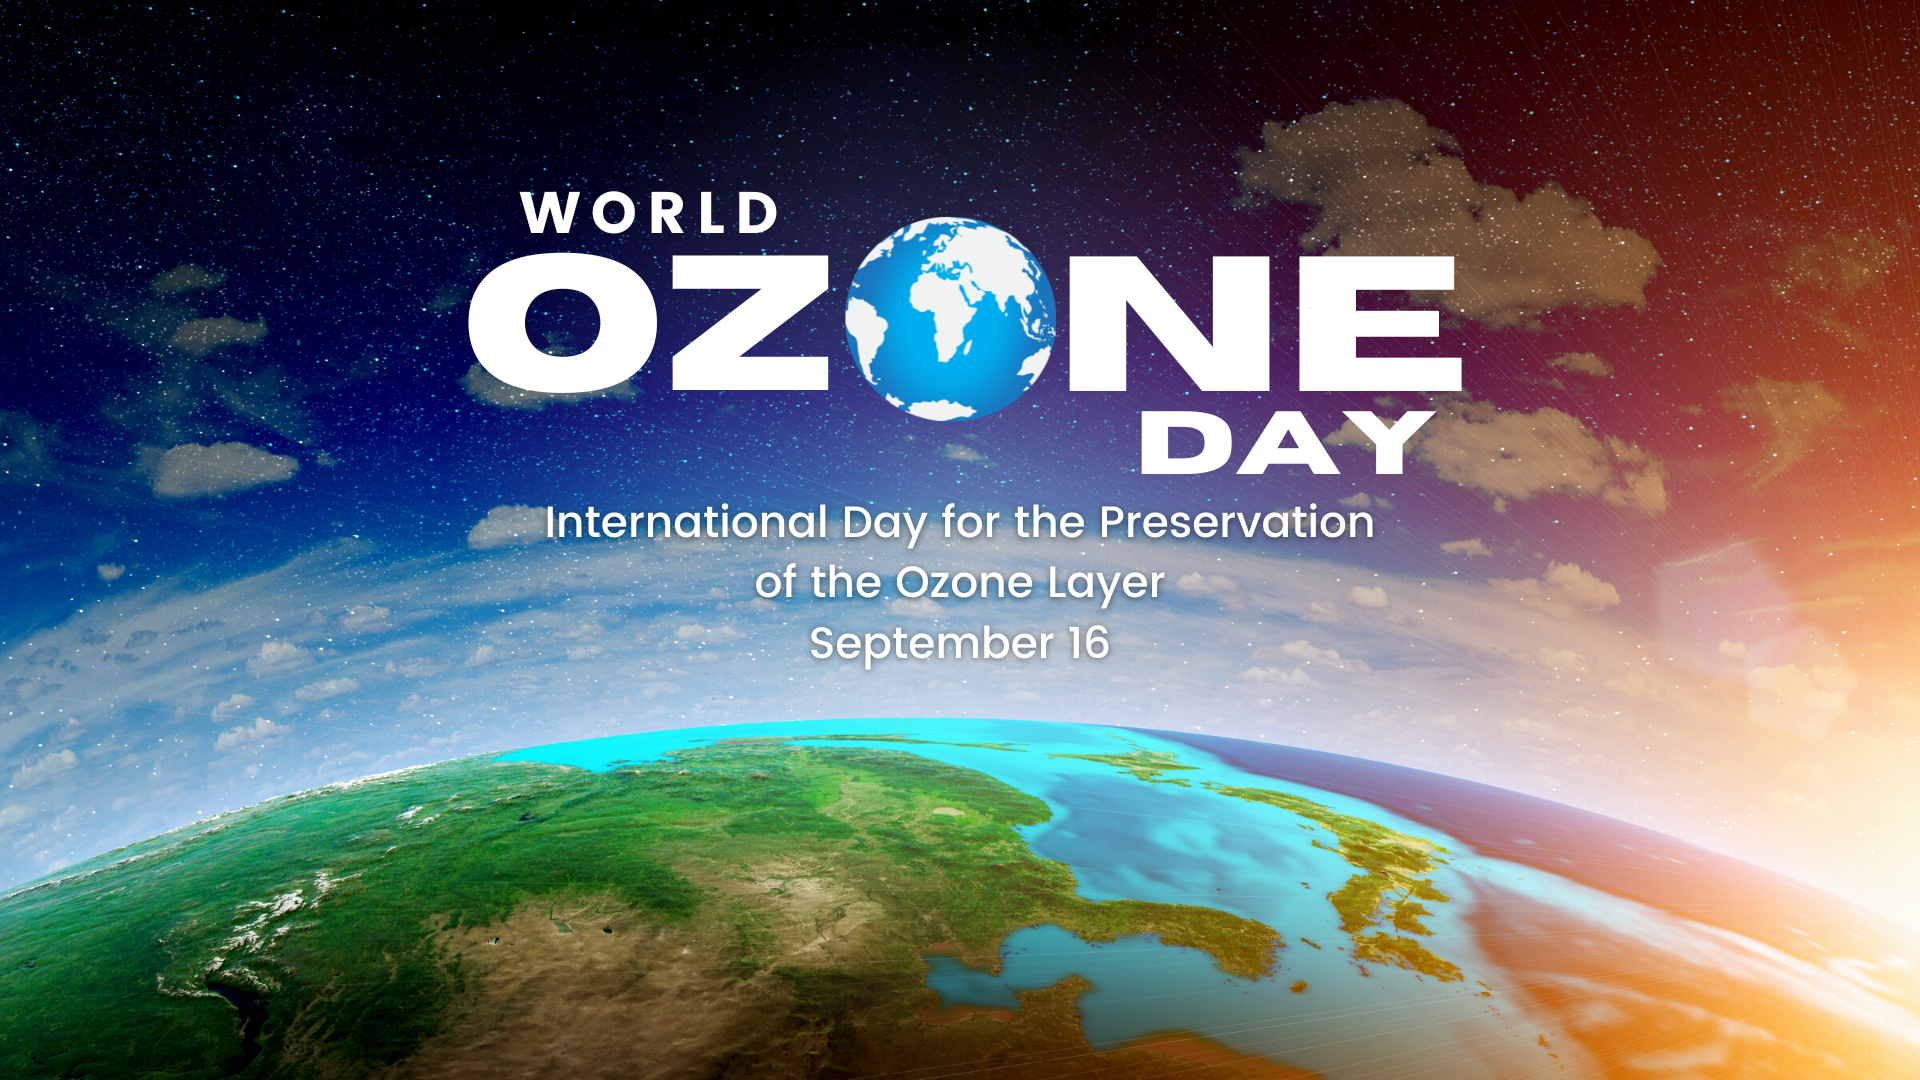 International Day for the Preservation of the Ozone Layer | RVA